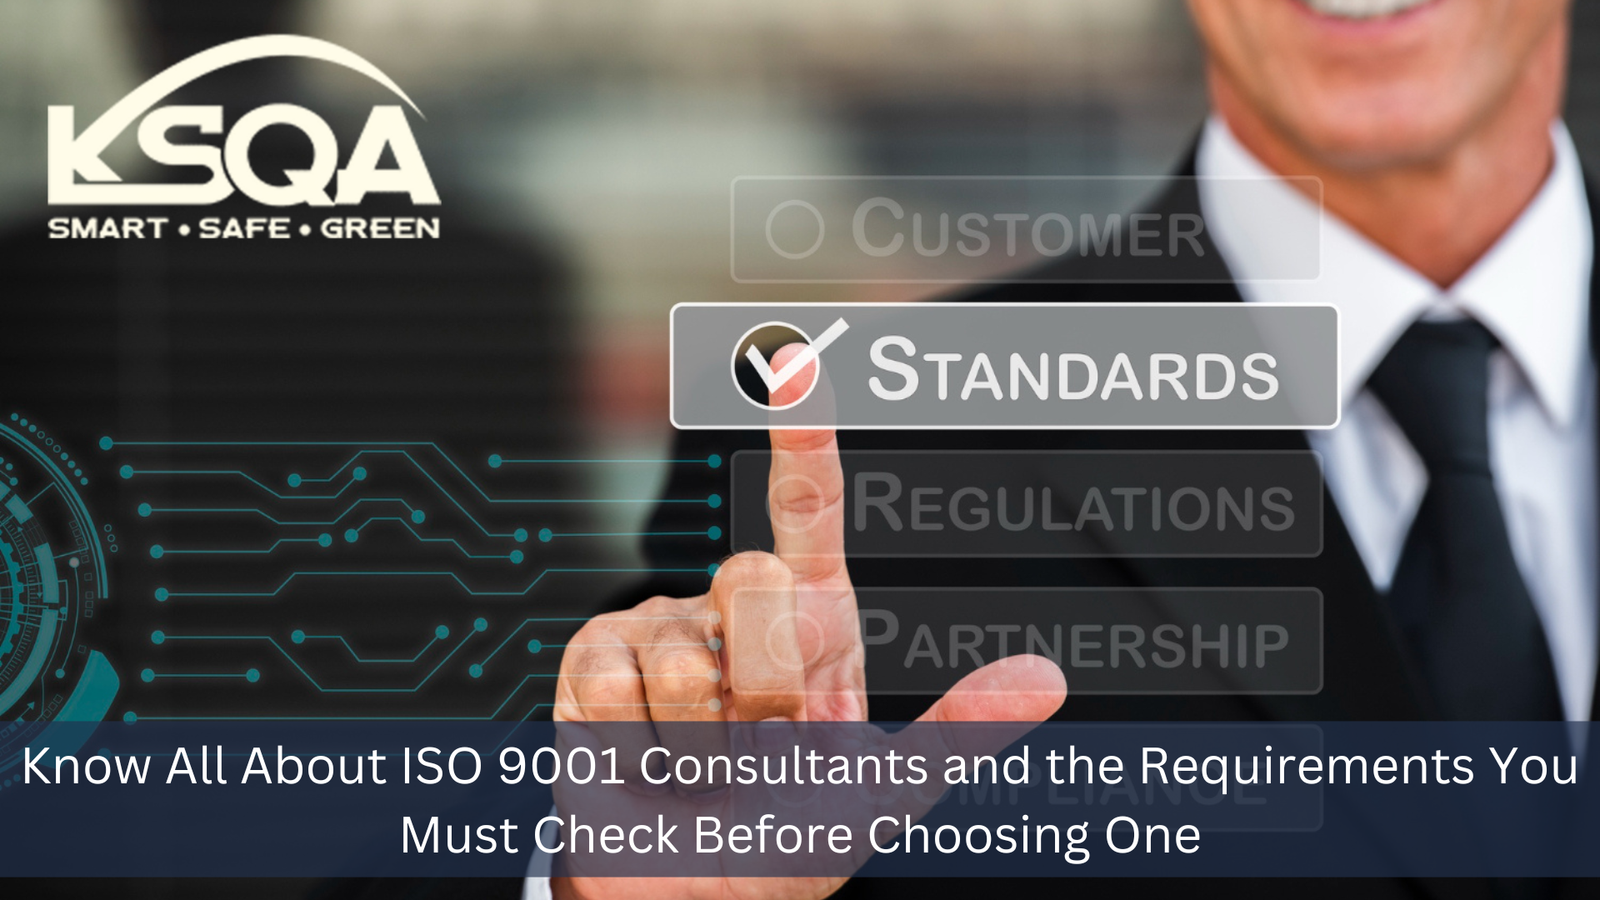 Know All About ISO 9001 Consultants and the Requirements You Must Check Before Choosing One